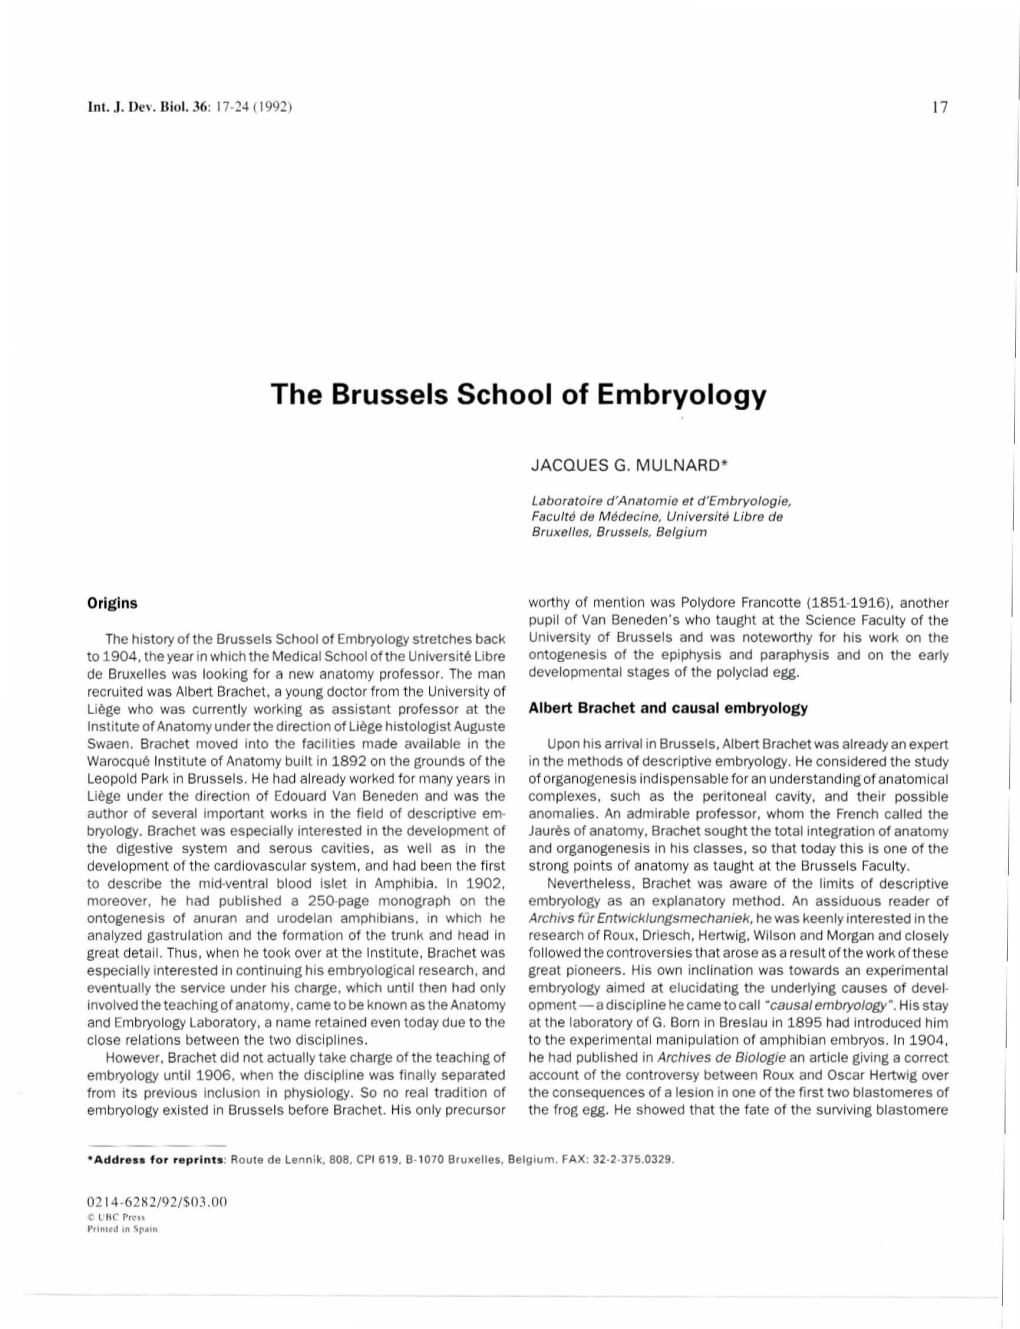 The Brussels School of Embryology